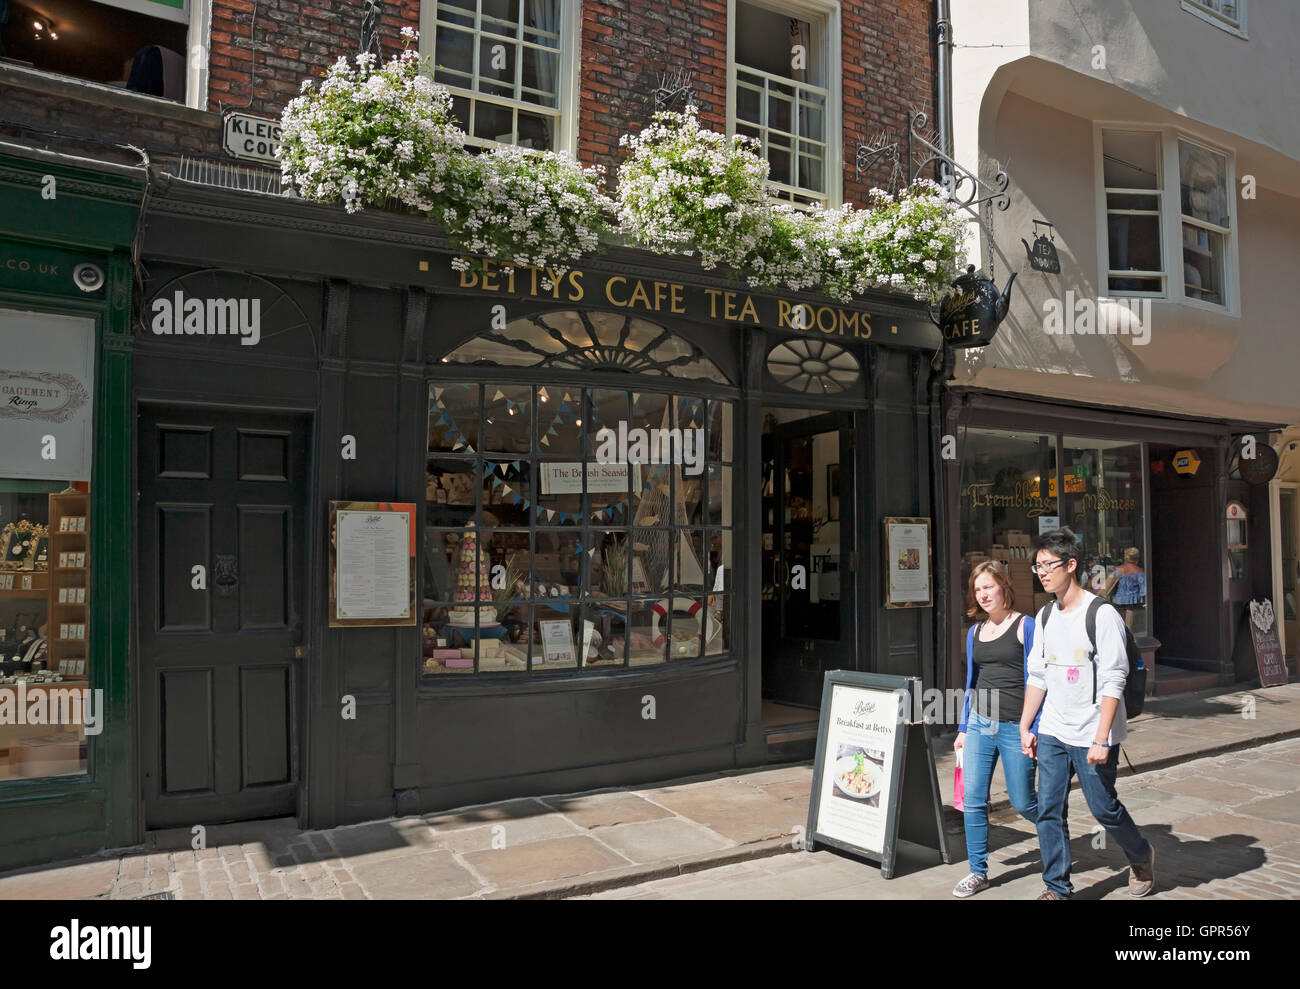 People tourists visitors outside Little Bettys cafe and tea rooms in summer Stonegate York North Yorkshire England UK United Kingdom GB Great Britain Stock Photo